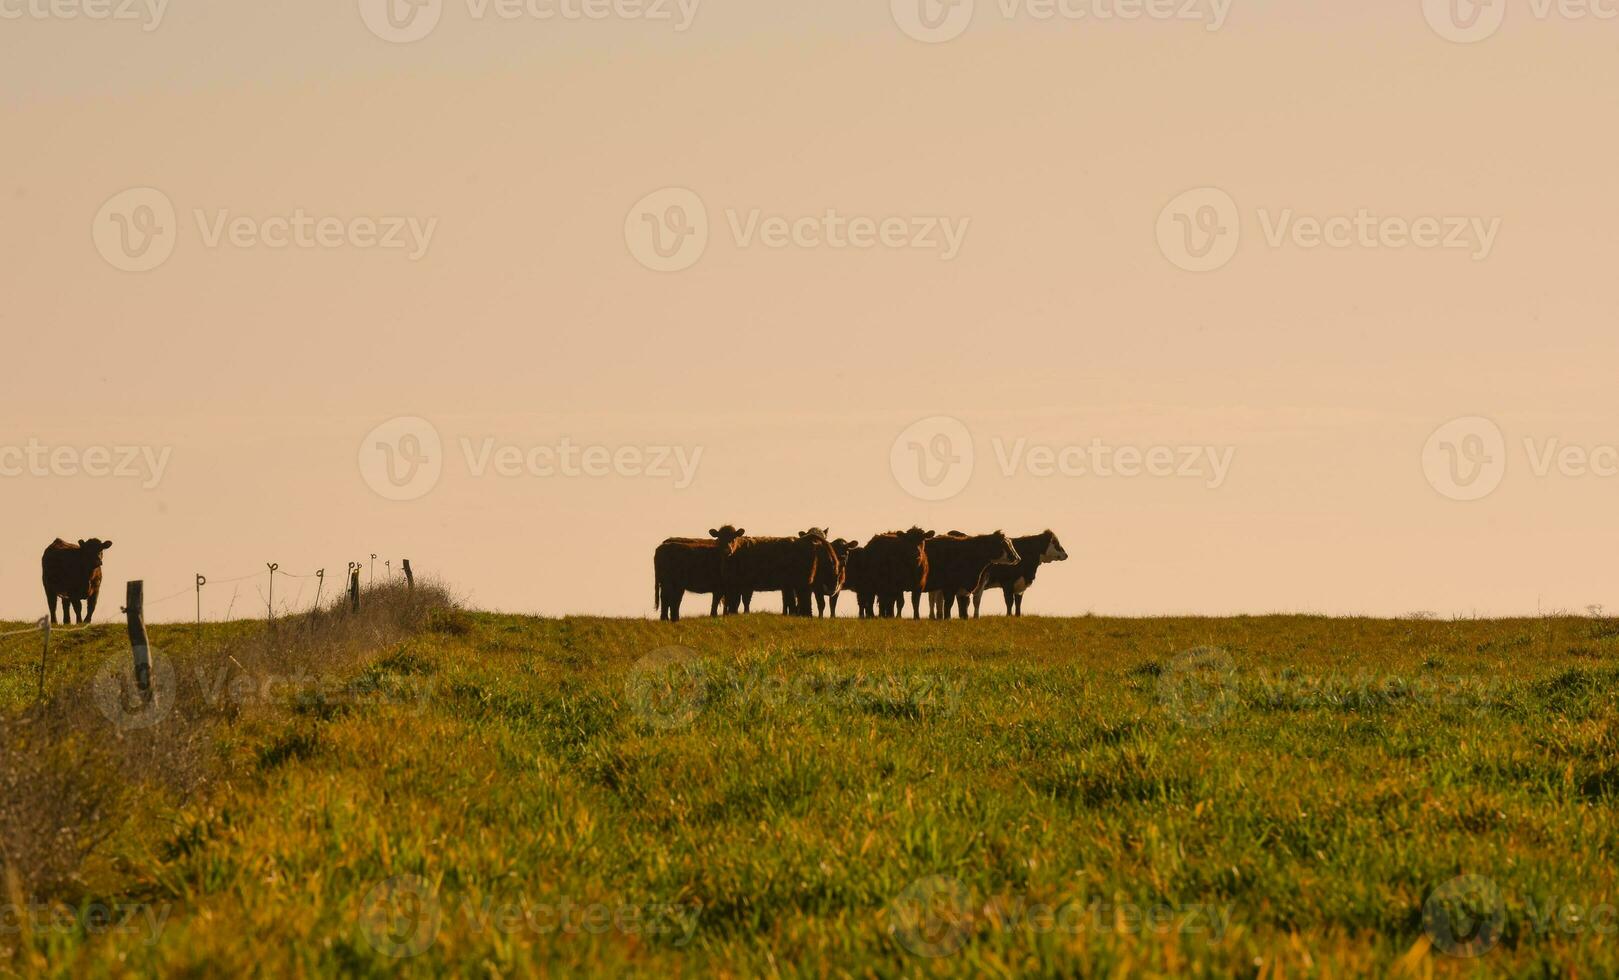 Countryside landscape with cows grazing, La Pampa, Argentina photo